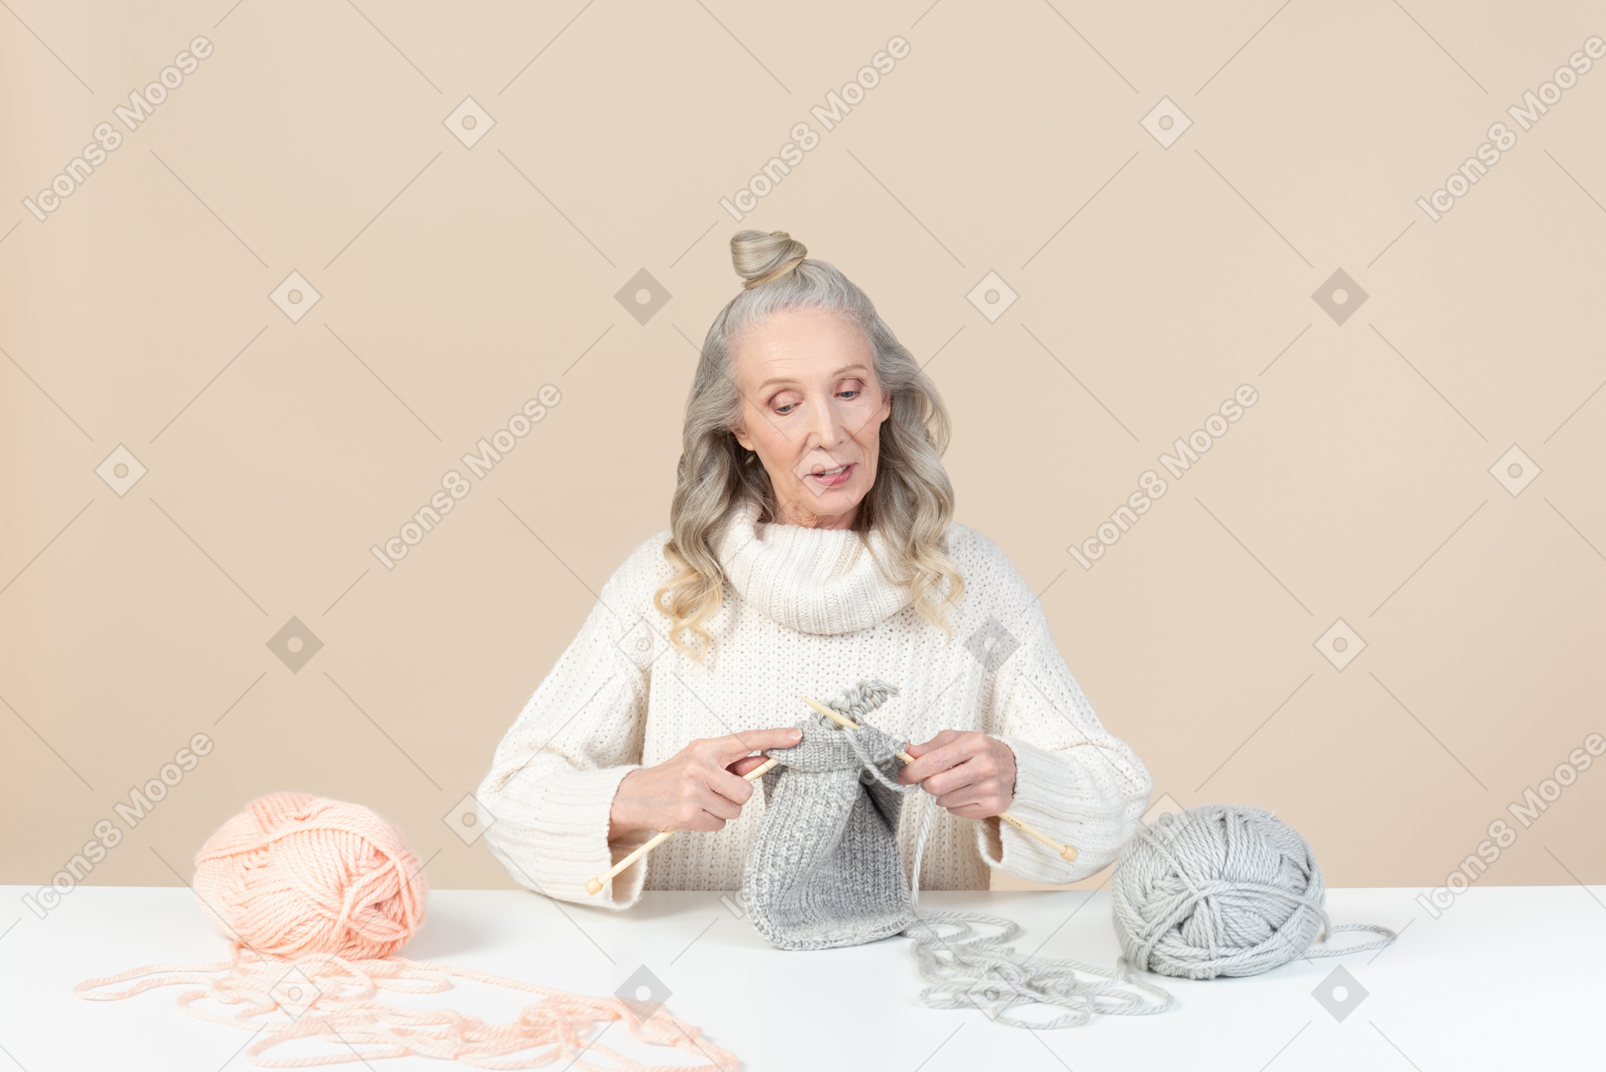 Guess, it's gonna be great knitted piece of clothes